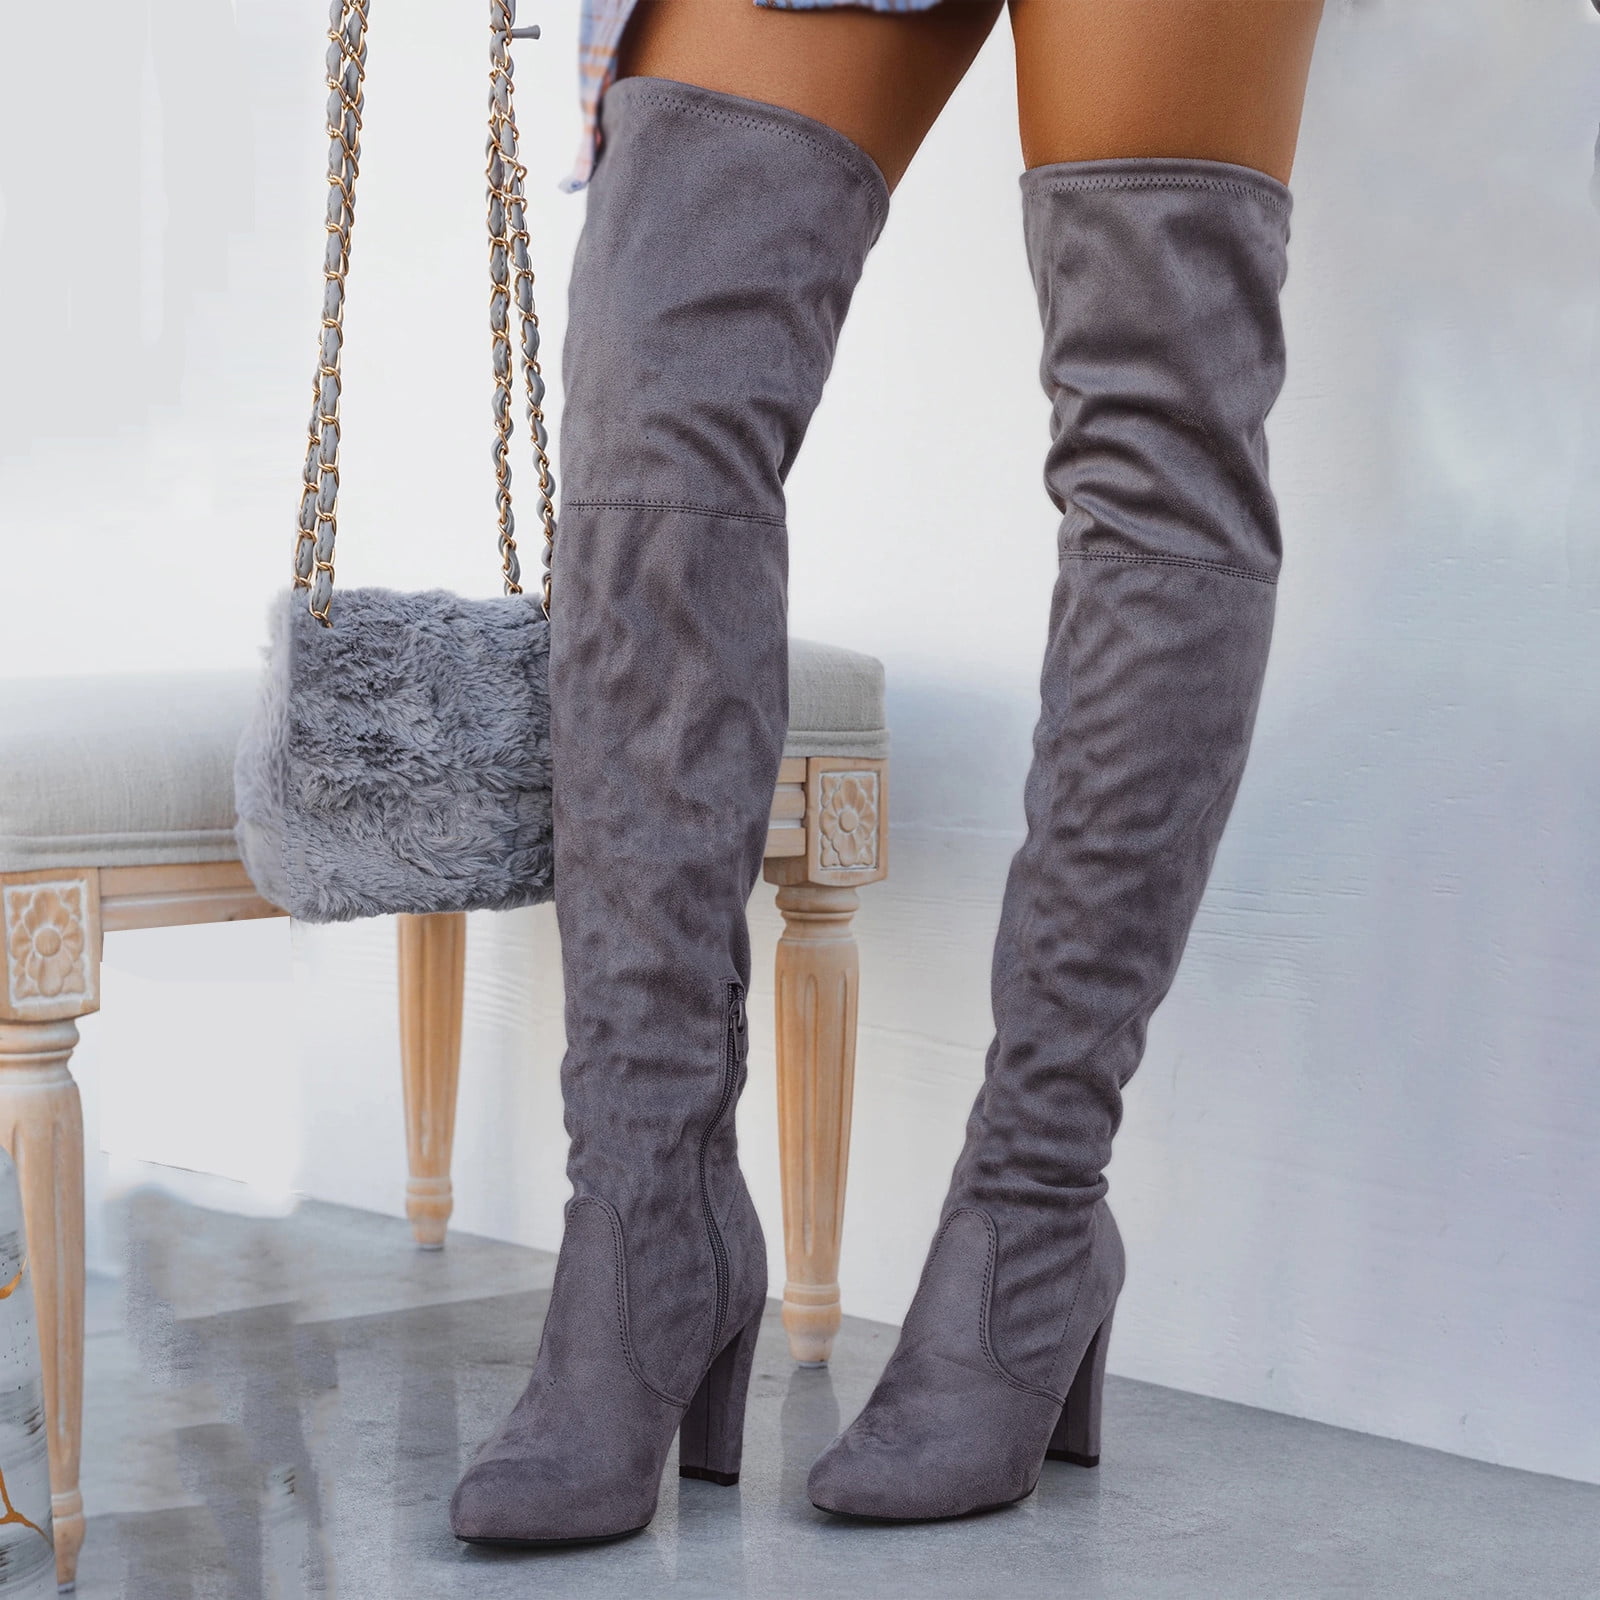 Over The Knee Boots For Women (Black) - Pinkshop